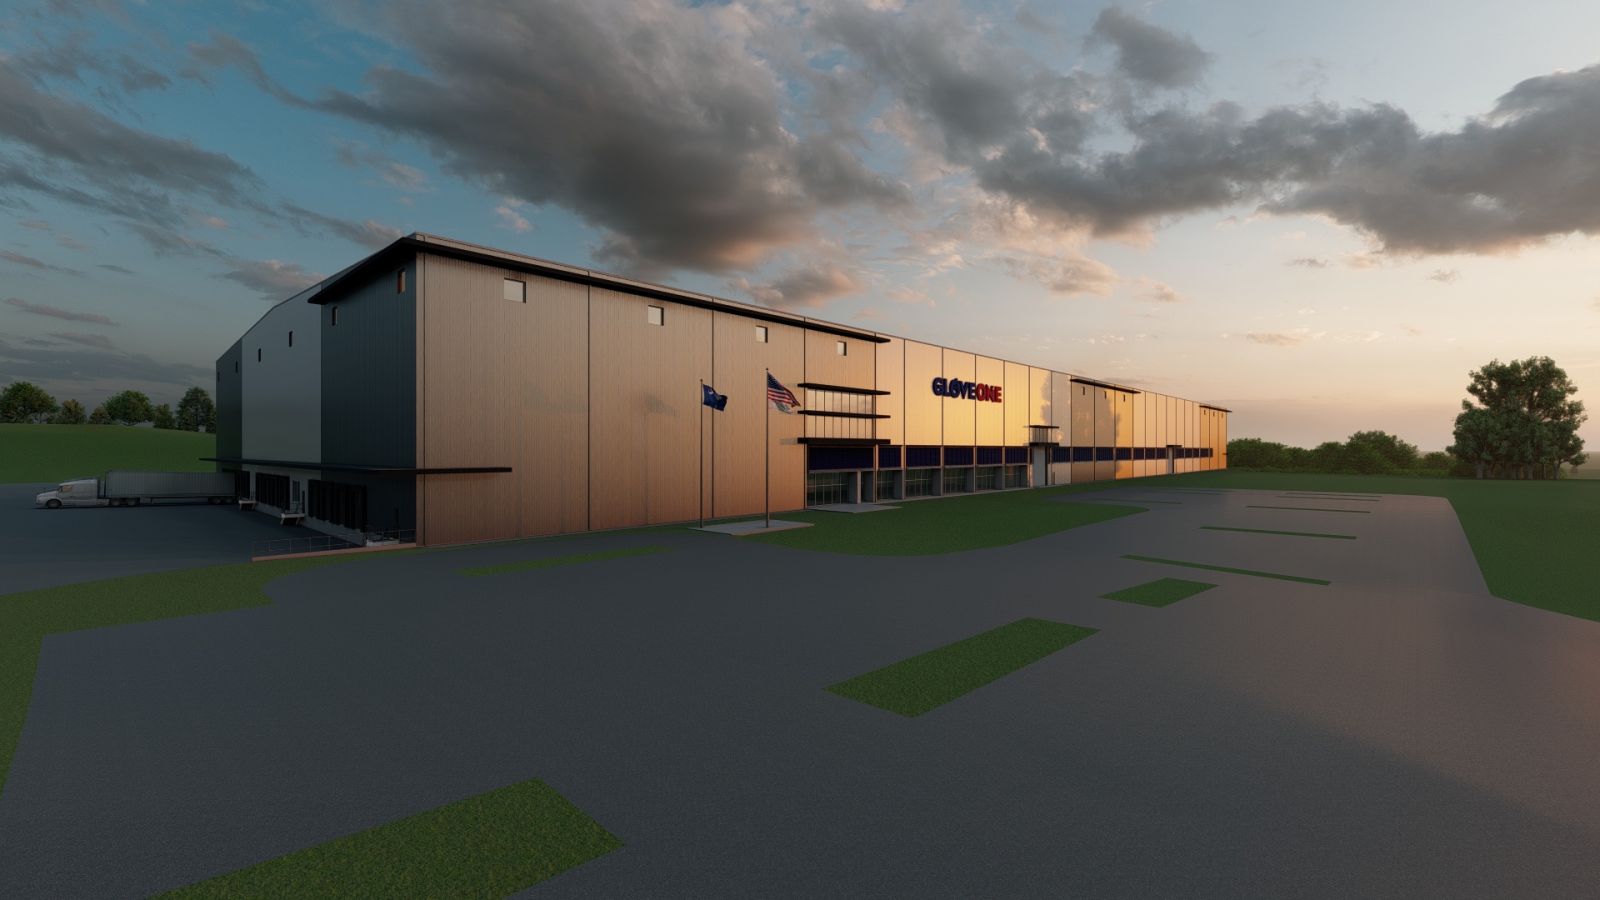 The plant, located in the Beechtree Business Park, is expected to hire more than 600 people over the next five years. (Rendering/Provided)